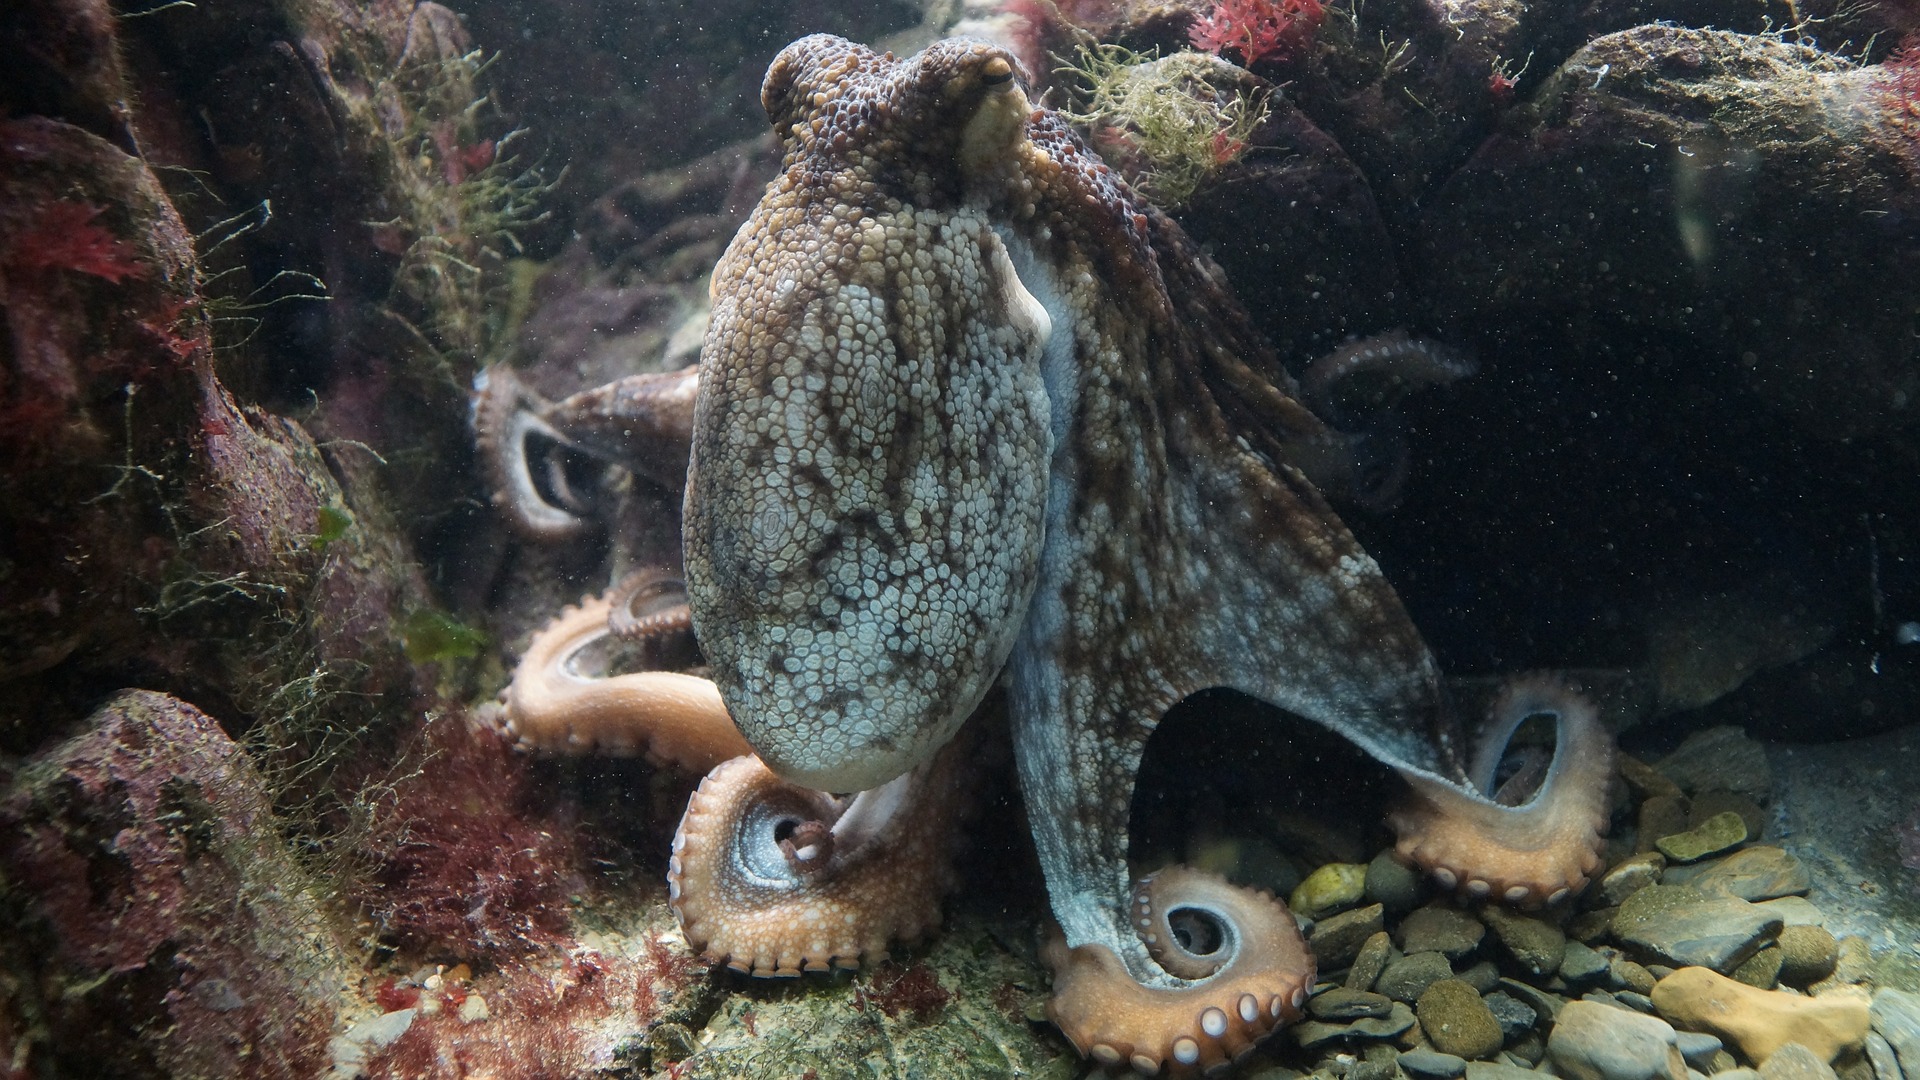 The octopus is an invertebrate which means it doesn't have any bones in their body. They can get into or squeeze through the tiniest of holes and cracks.